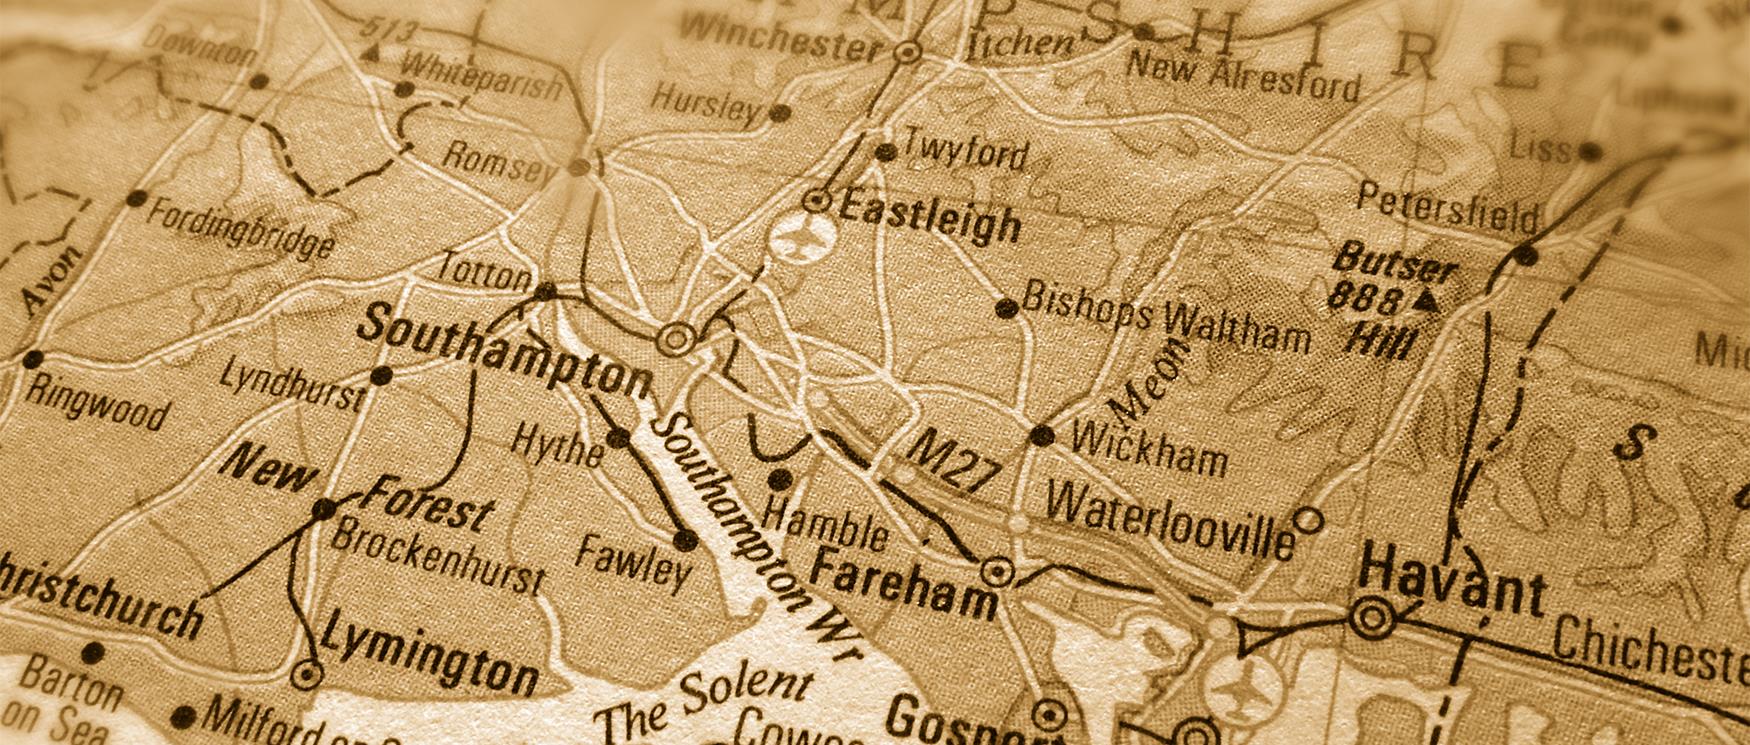 Maps of Hampshire